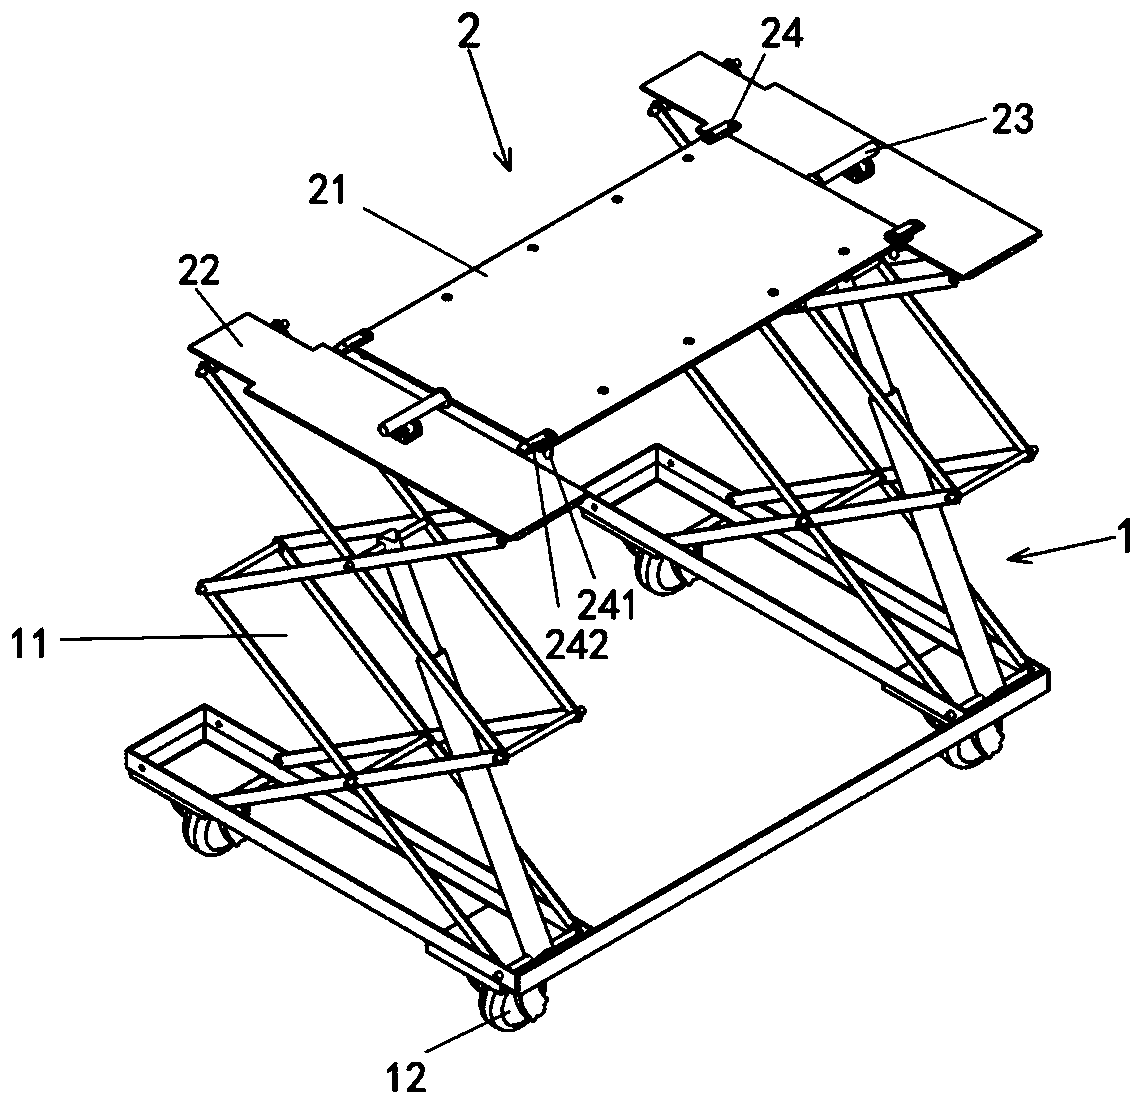 Cart bed for turning over before spinal operation